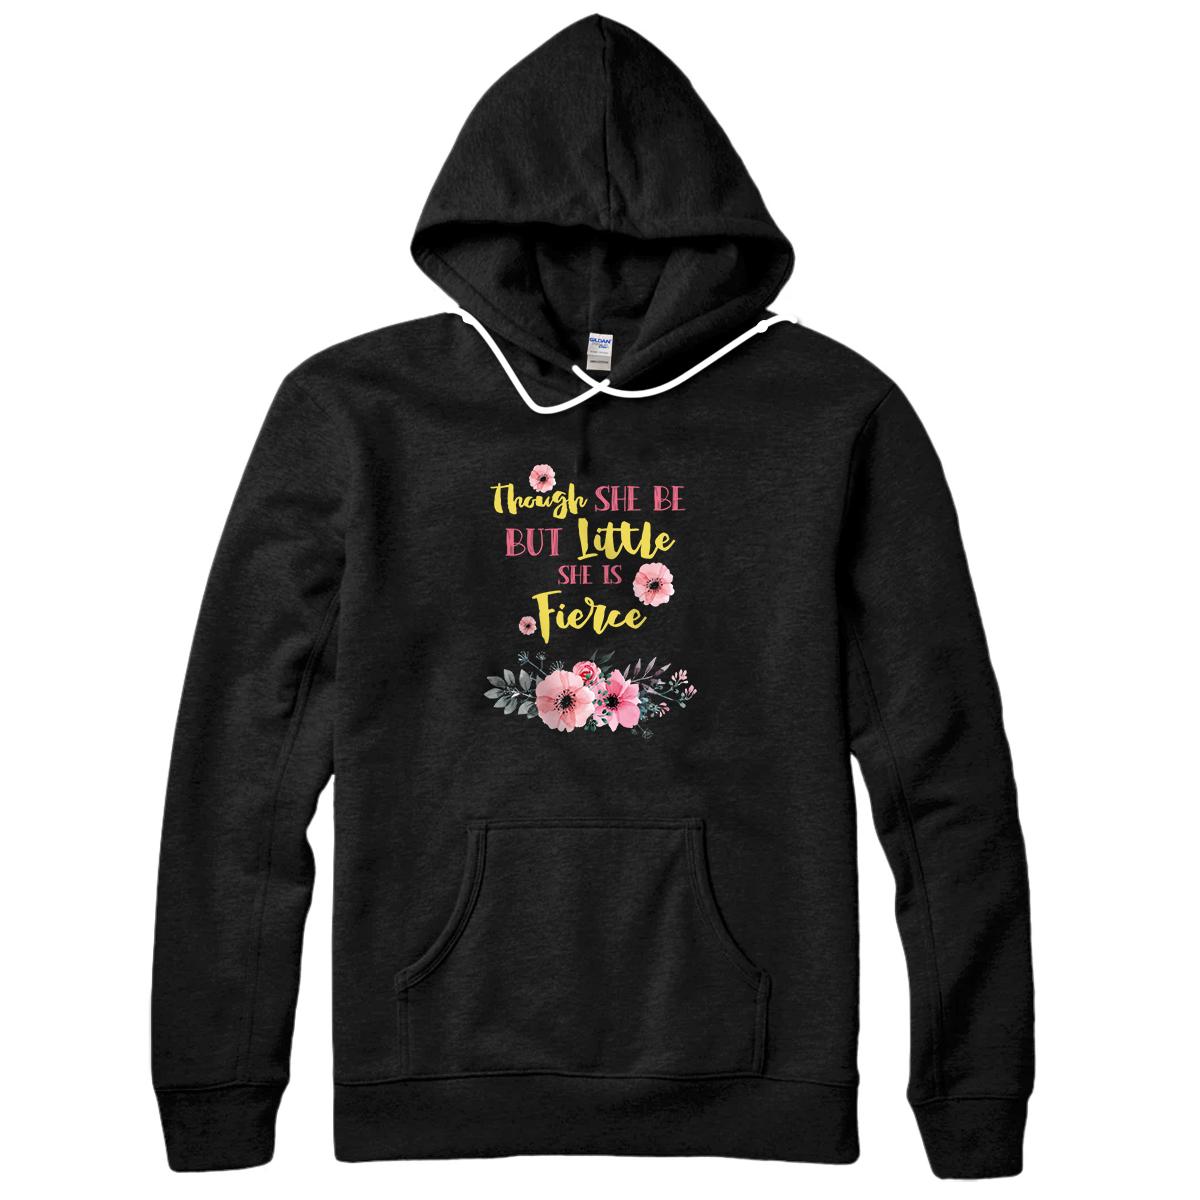 Personalized Though She Be But Little She Is Fierce Pullover Hoodie